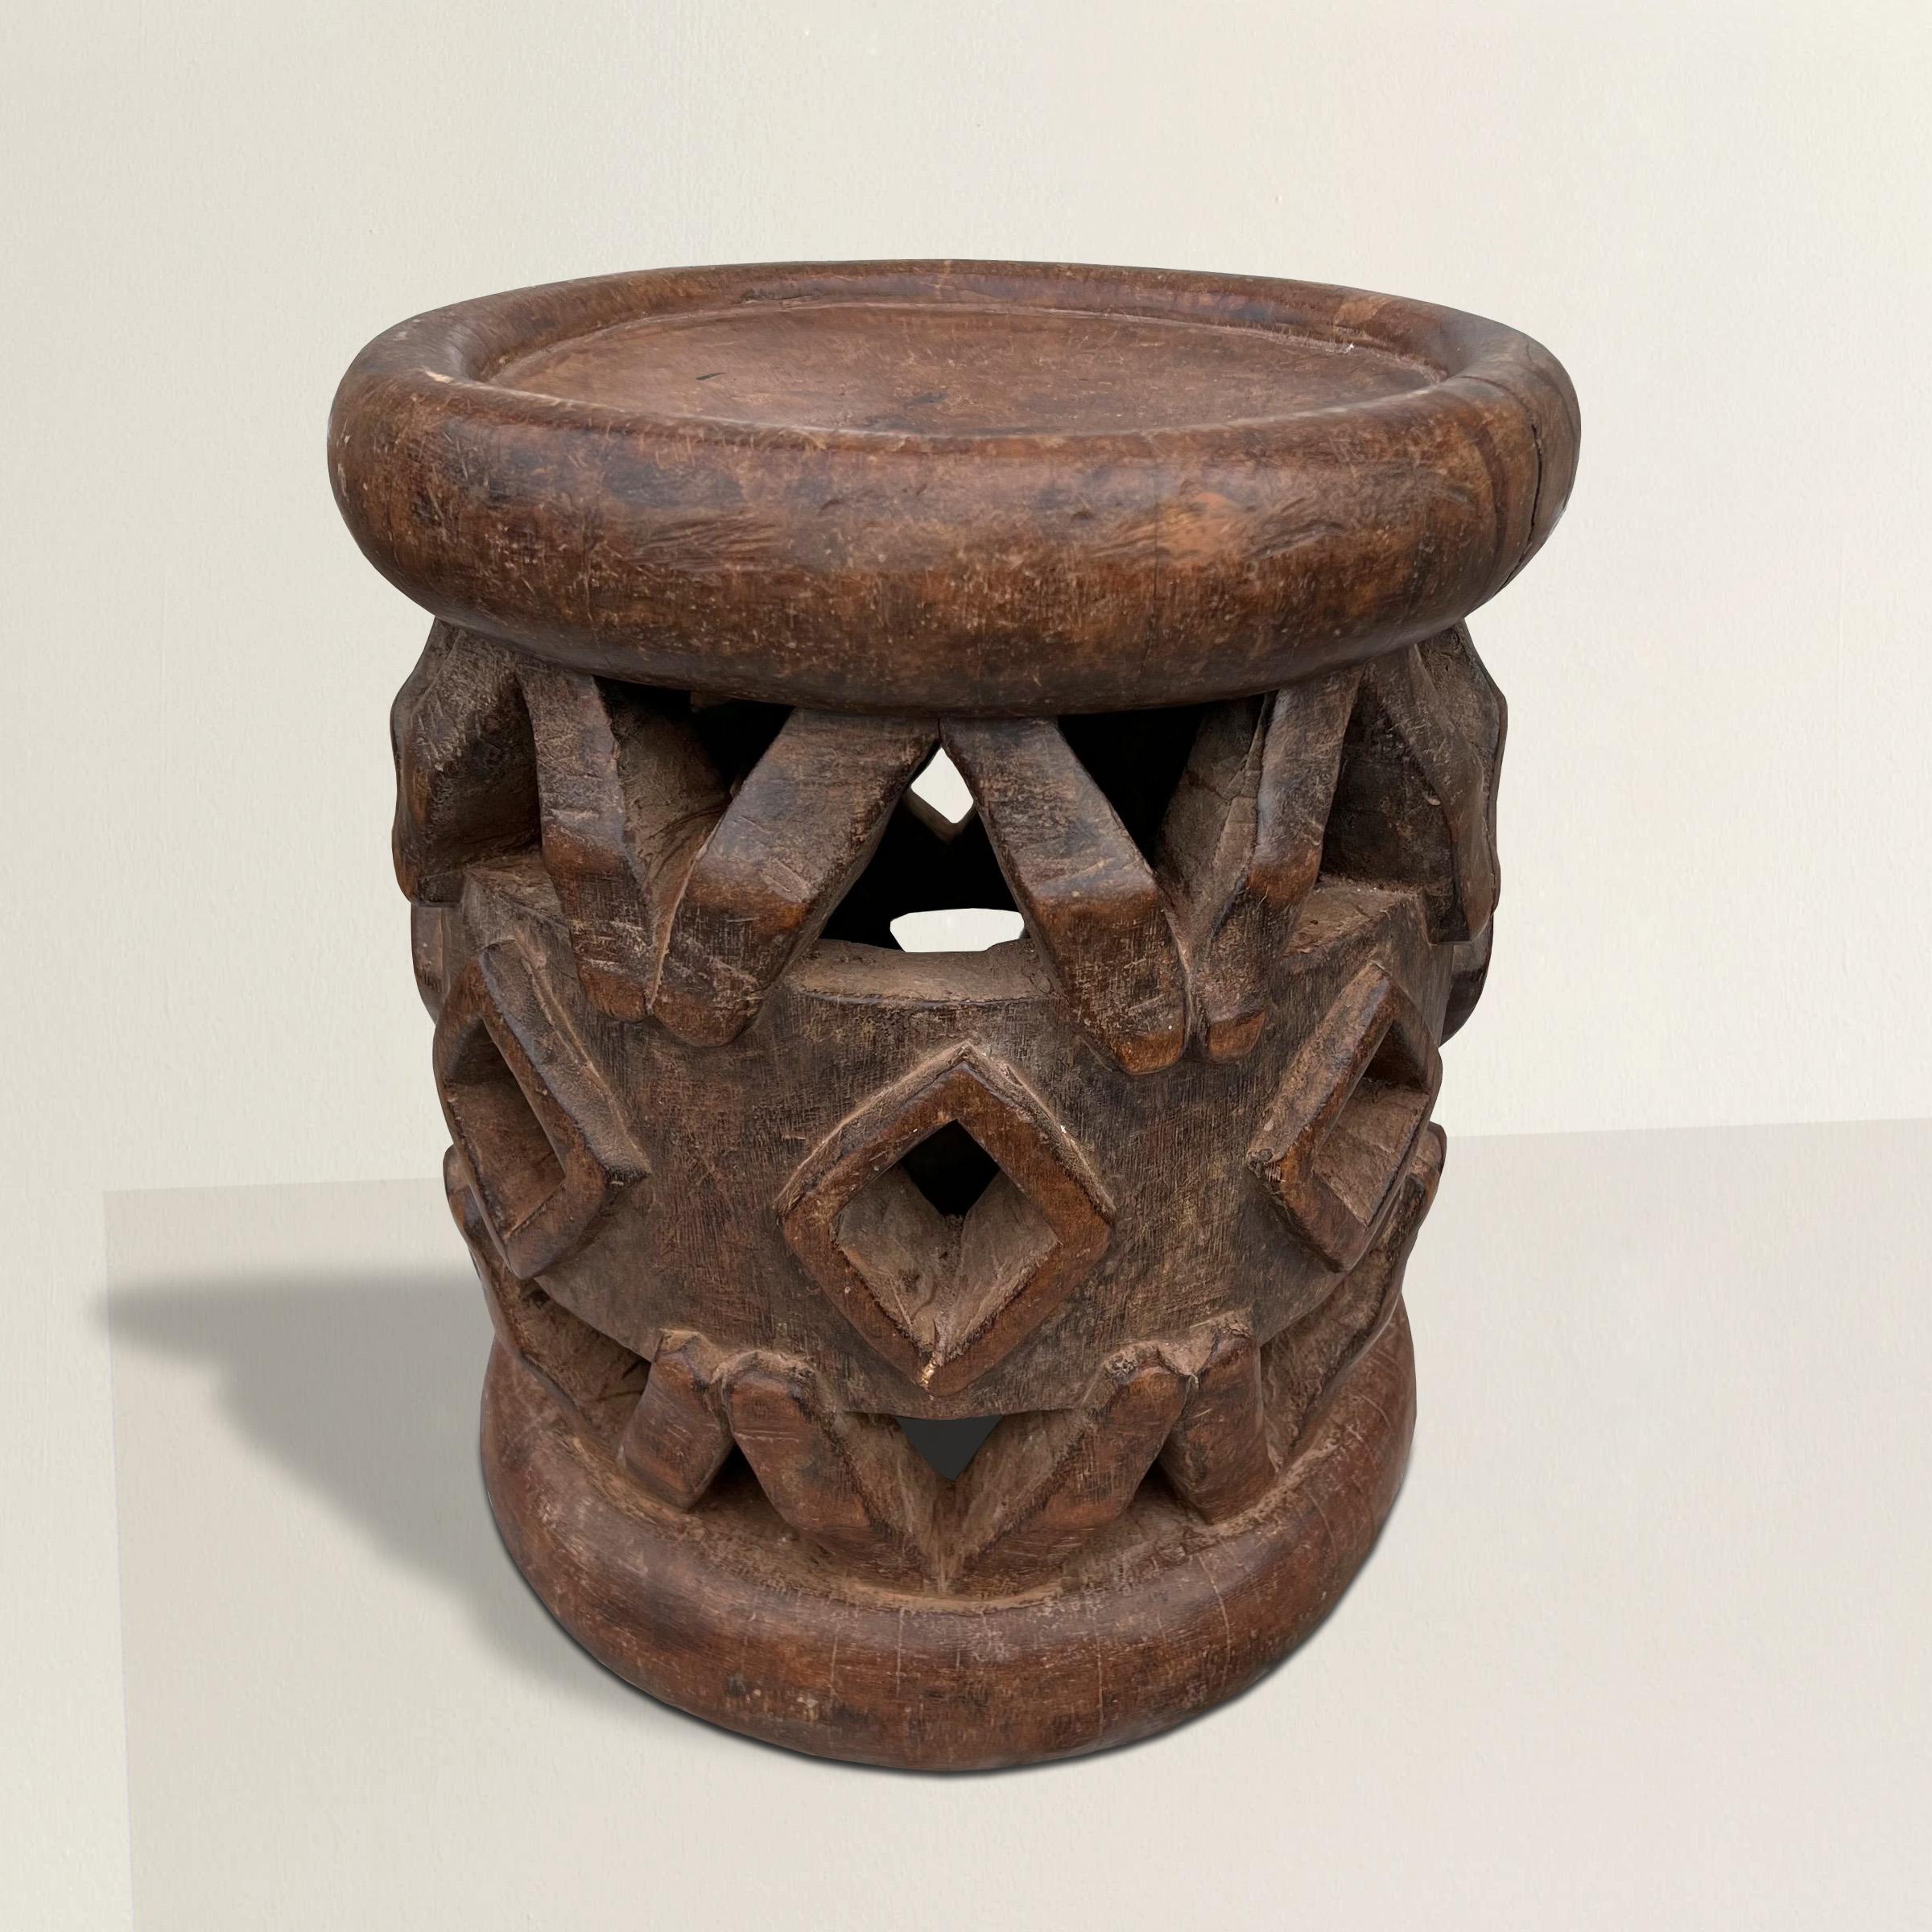 An outstanding early 20th century Bamileke stool hand-carved of one piece of wood with a wonderful geometric pattern, and with the most beautiful patina that only time can bestow. The stool can also double as a side table next to your favorite